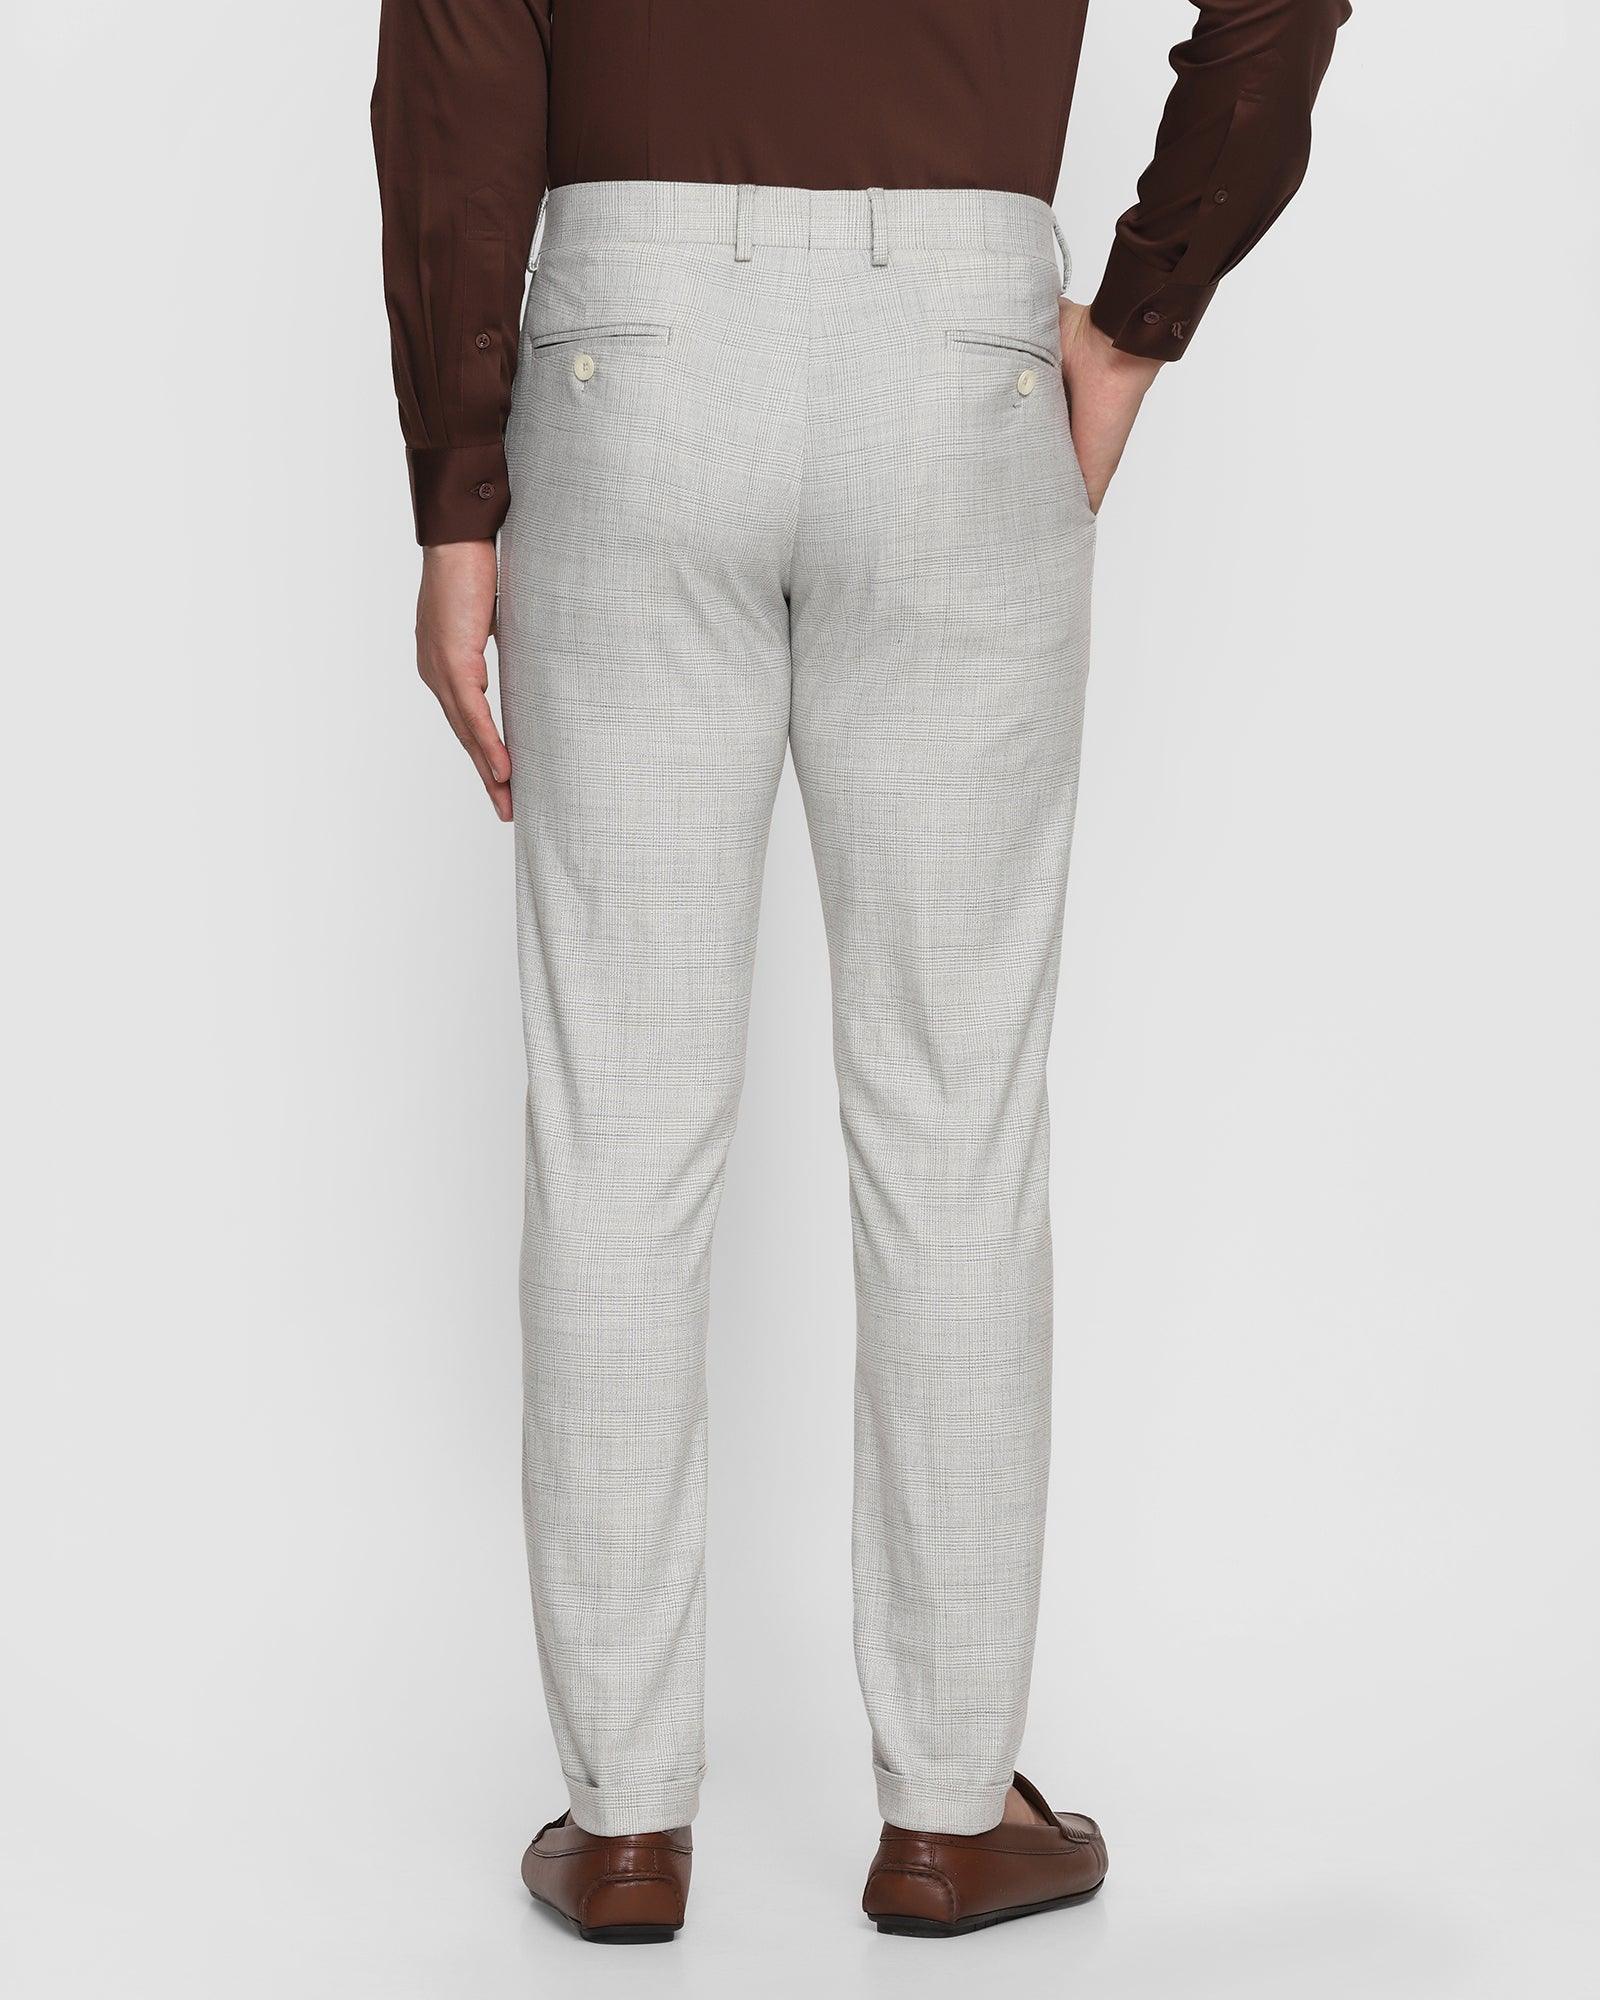 MARC DARCY Ross Grey Check Trousers - Formal Wear from Revolver Menswear UK